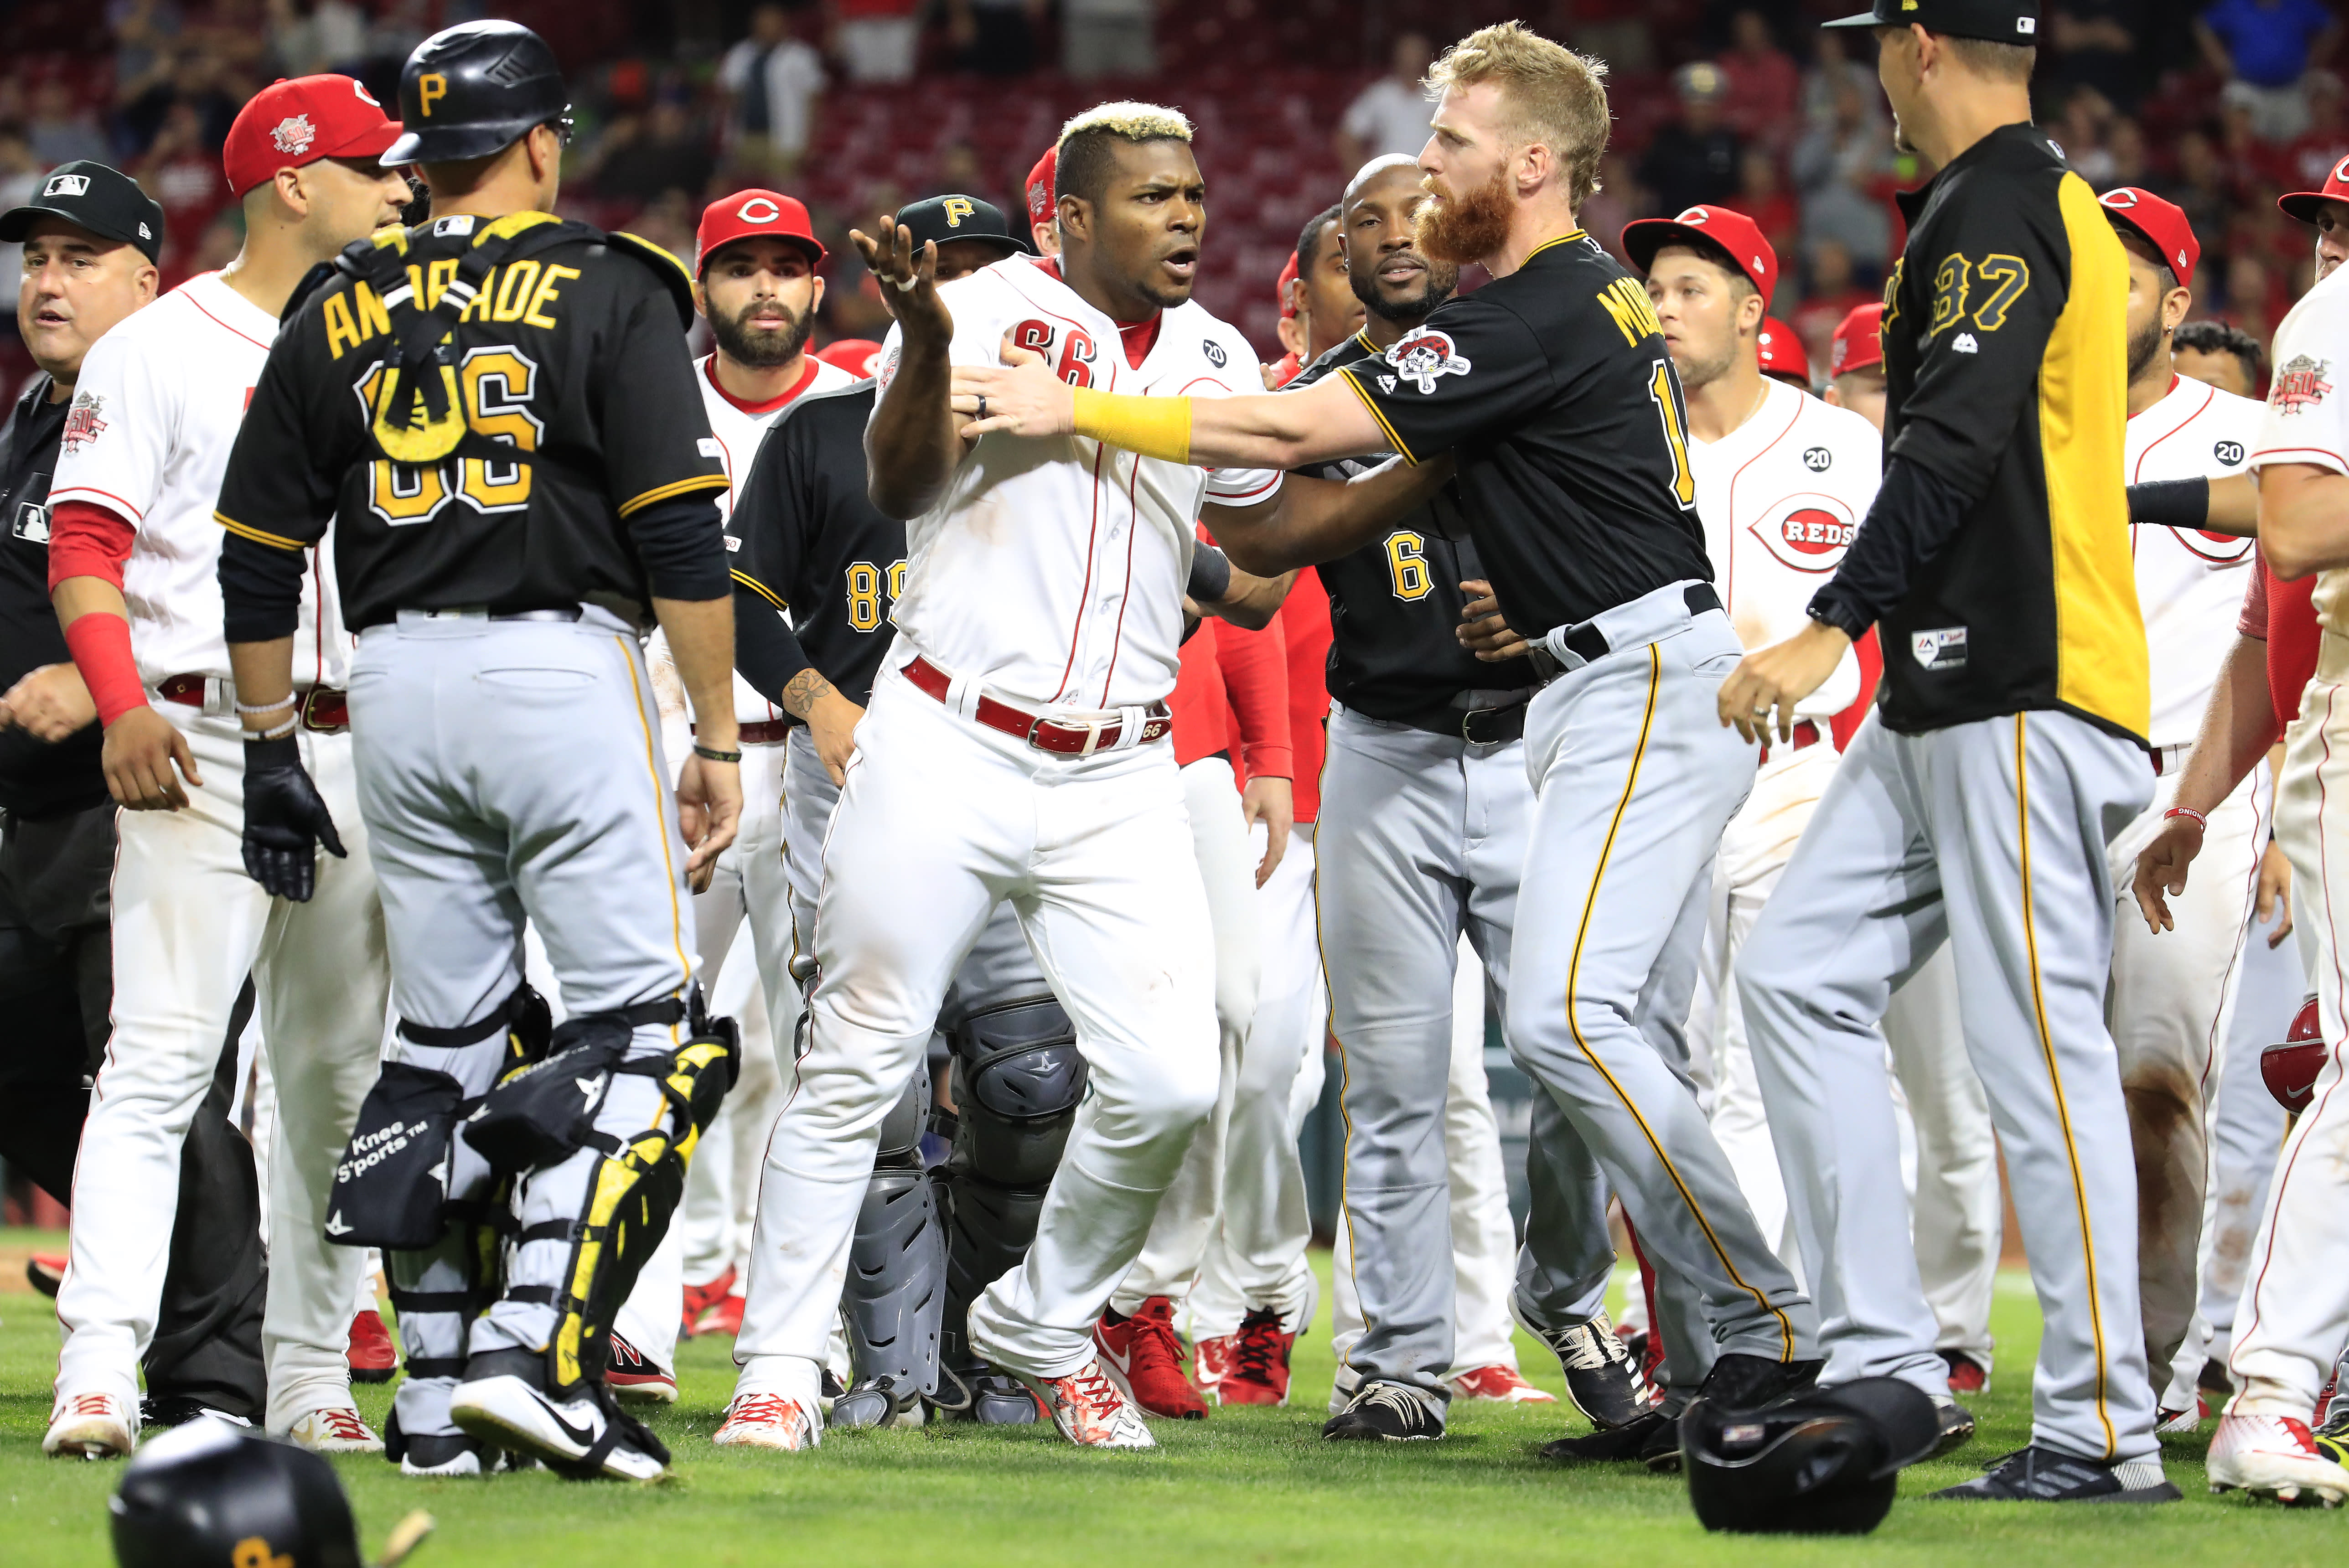 Basebrawl! Huge fight in MLB leads to five player ejections